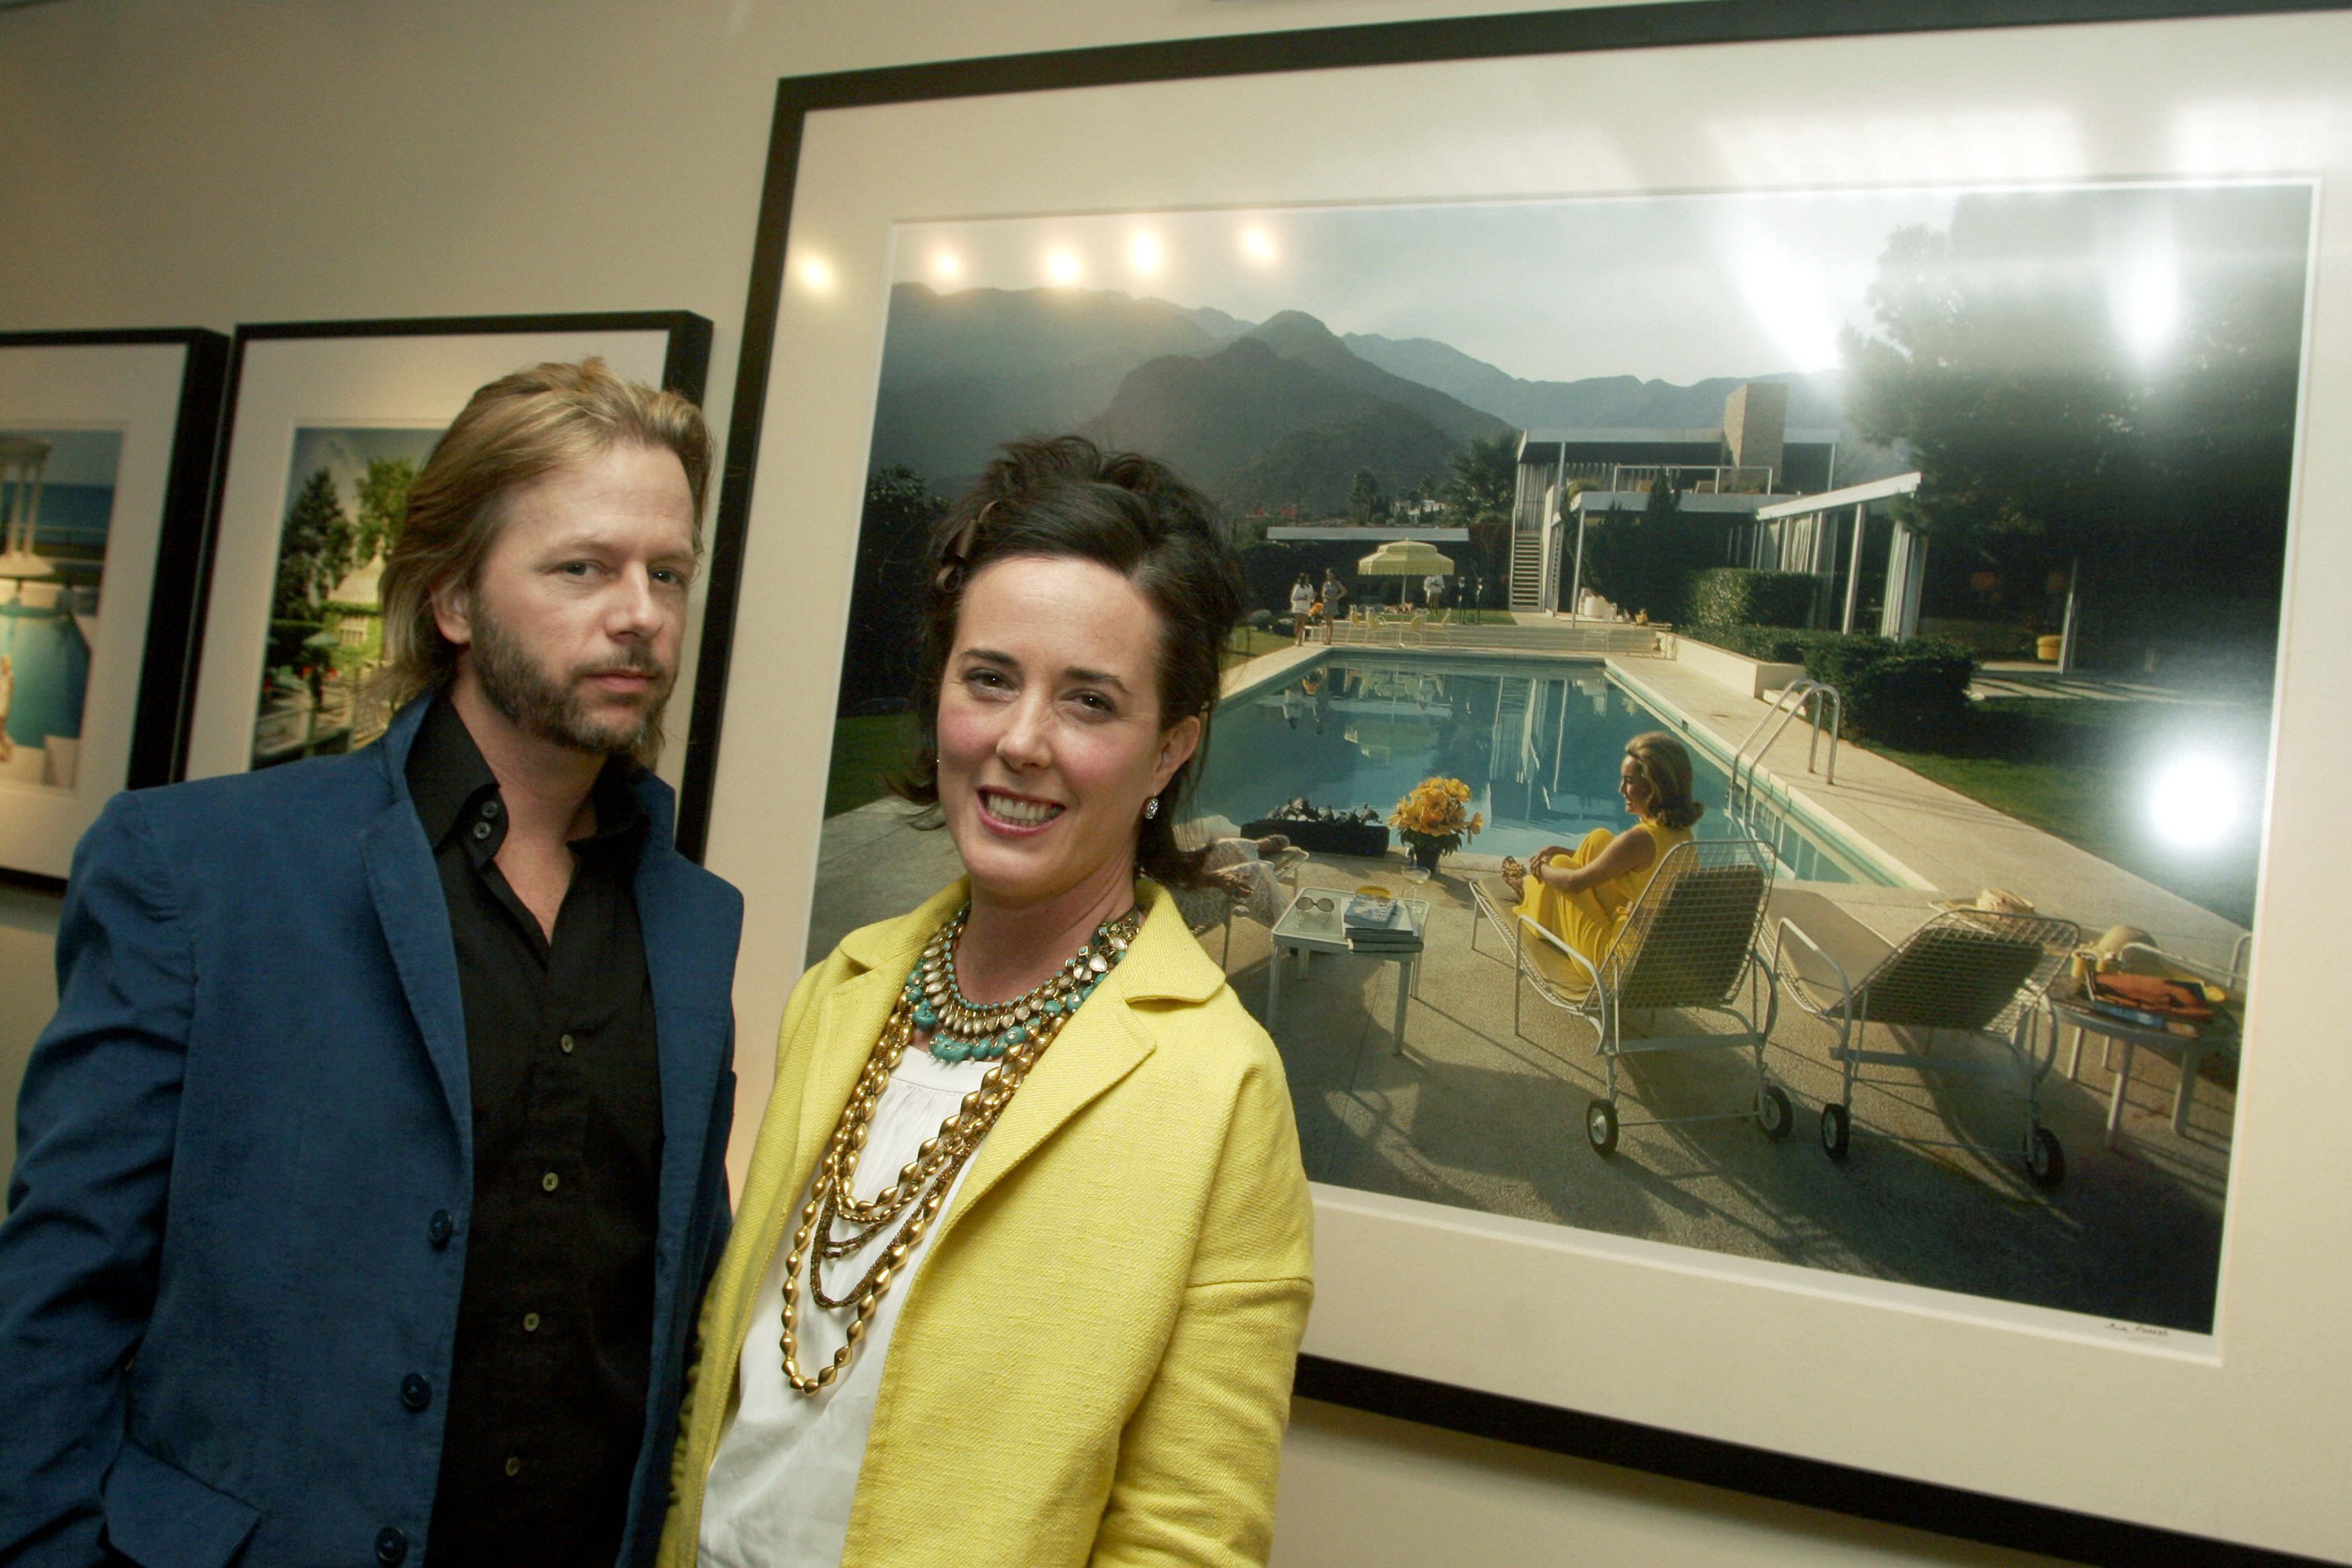 David Spade reflects on sister-in-law Kate Spade | CNN